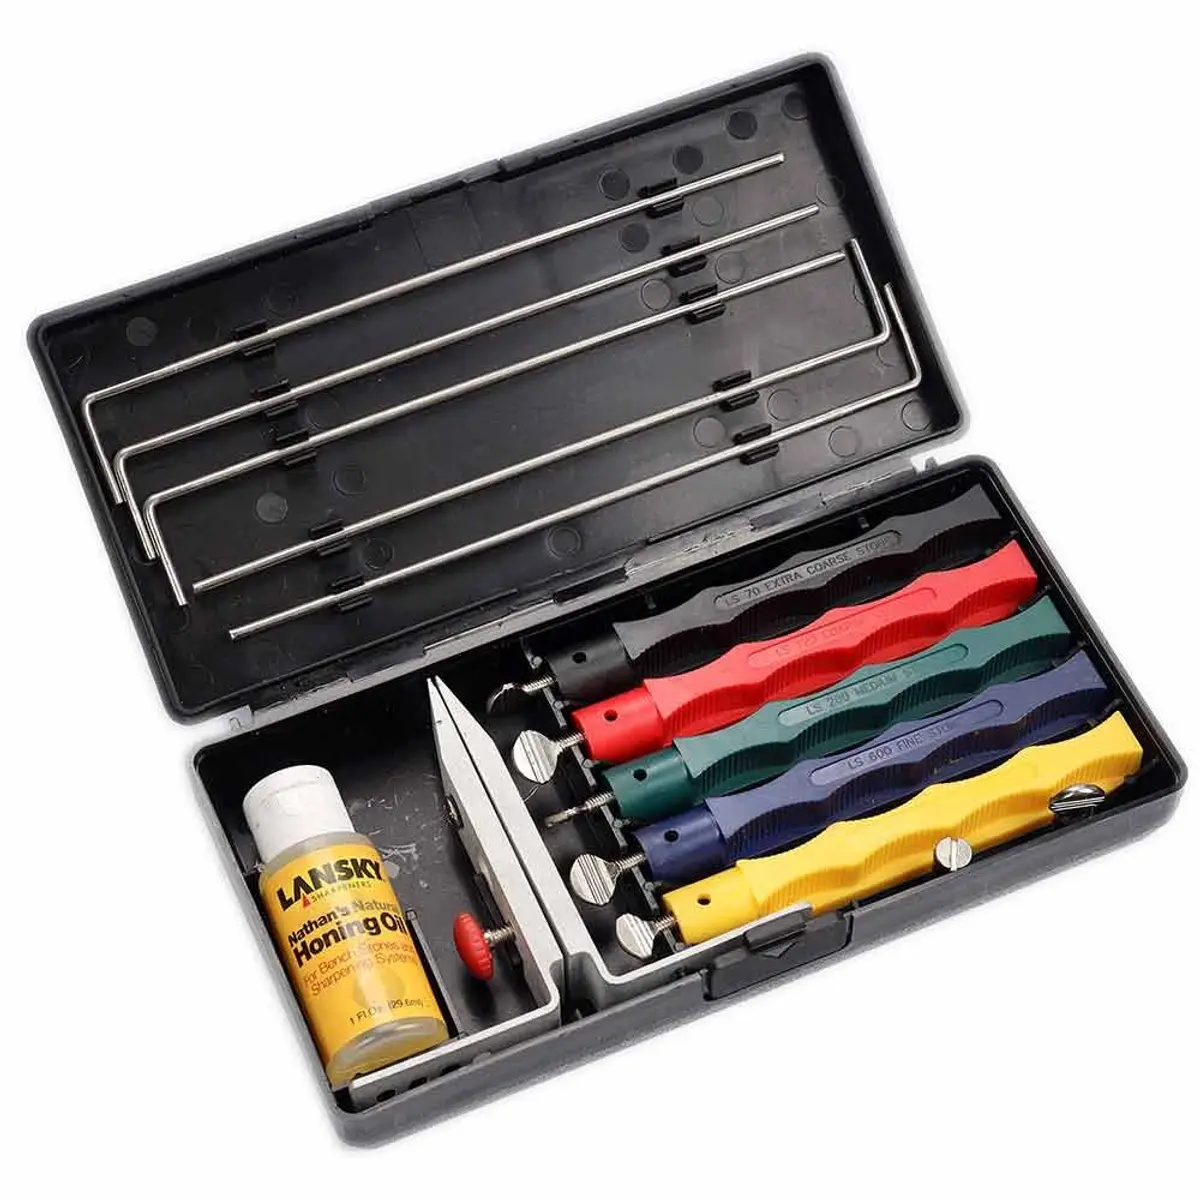 Lansky Deluxe 5-Stone Sharpening System Review